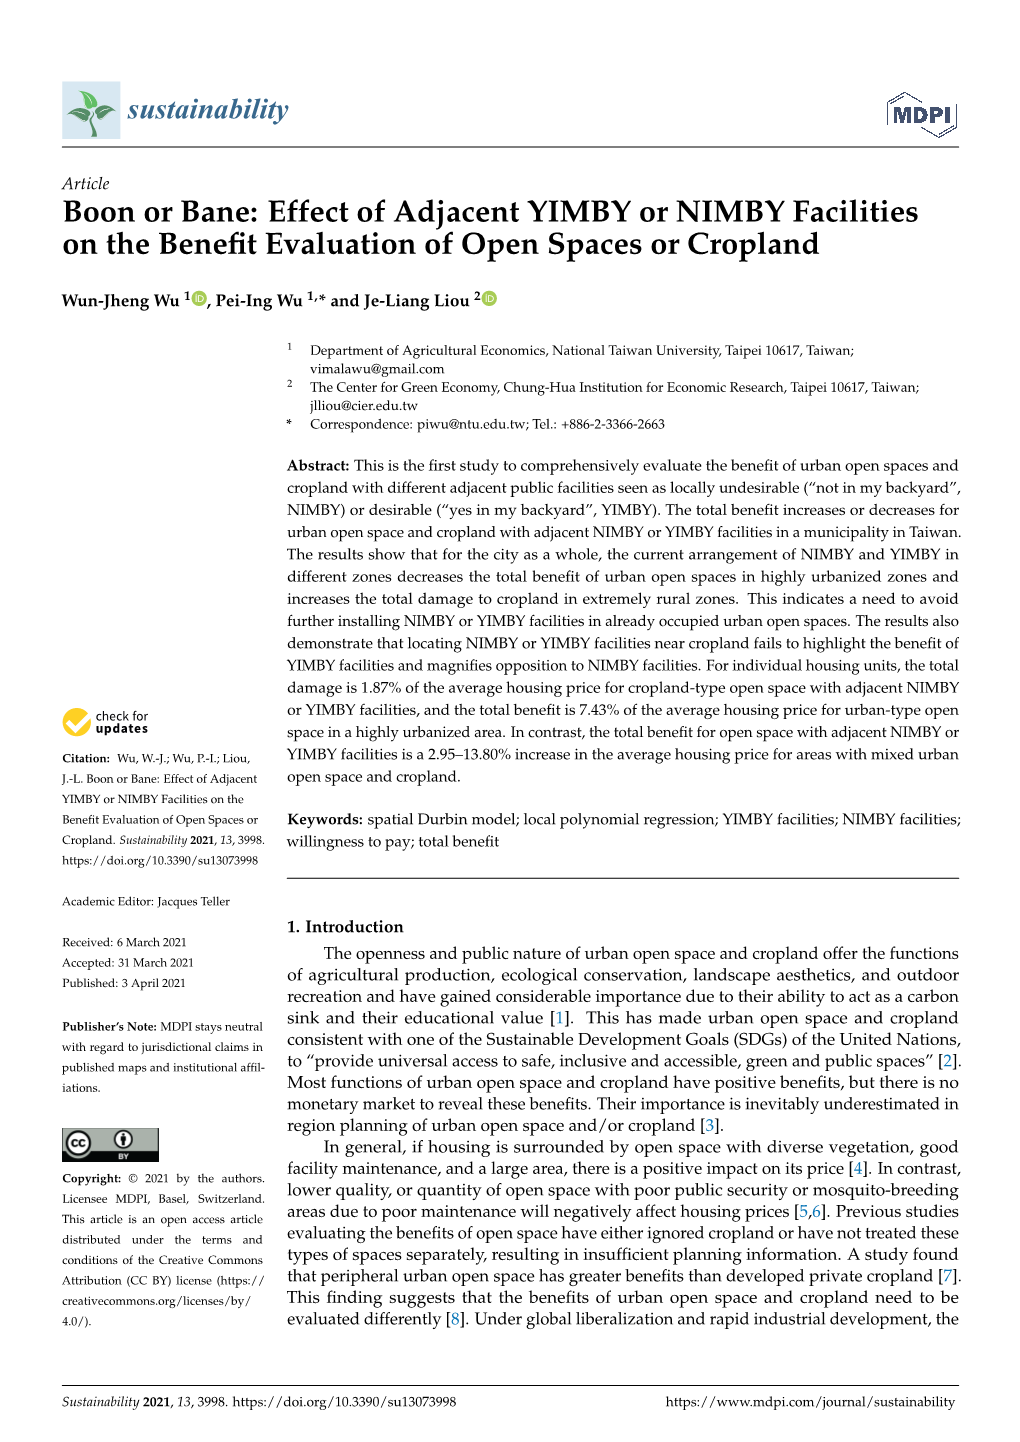 Effect of Adjacent YIMBY Or NIMBY Facilities on the Benefit Evaluation of Open Spaces Or Cropland